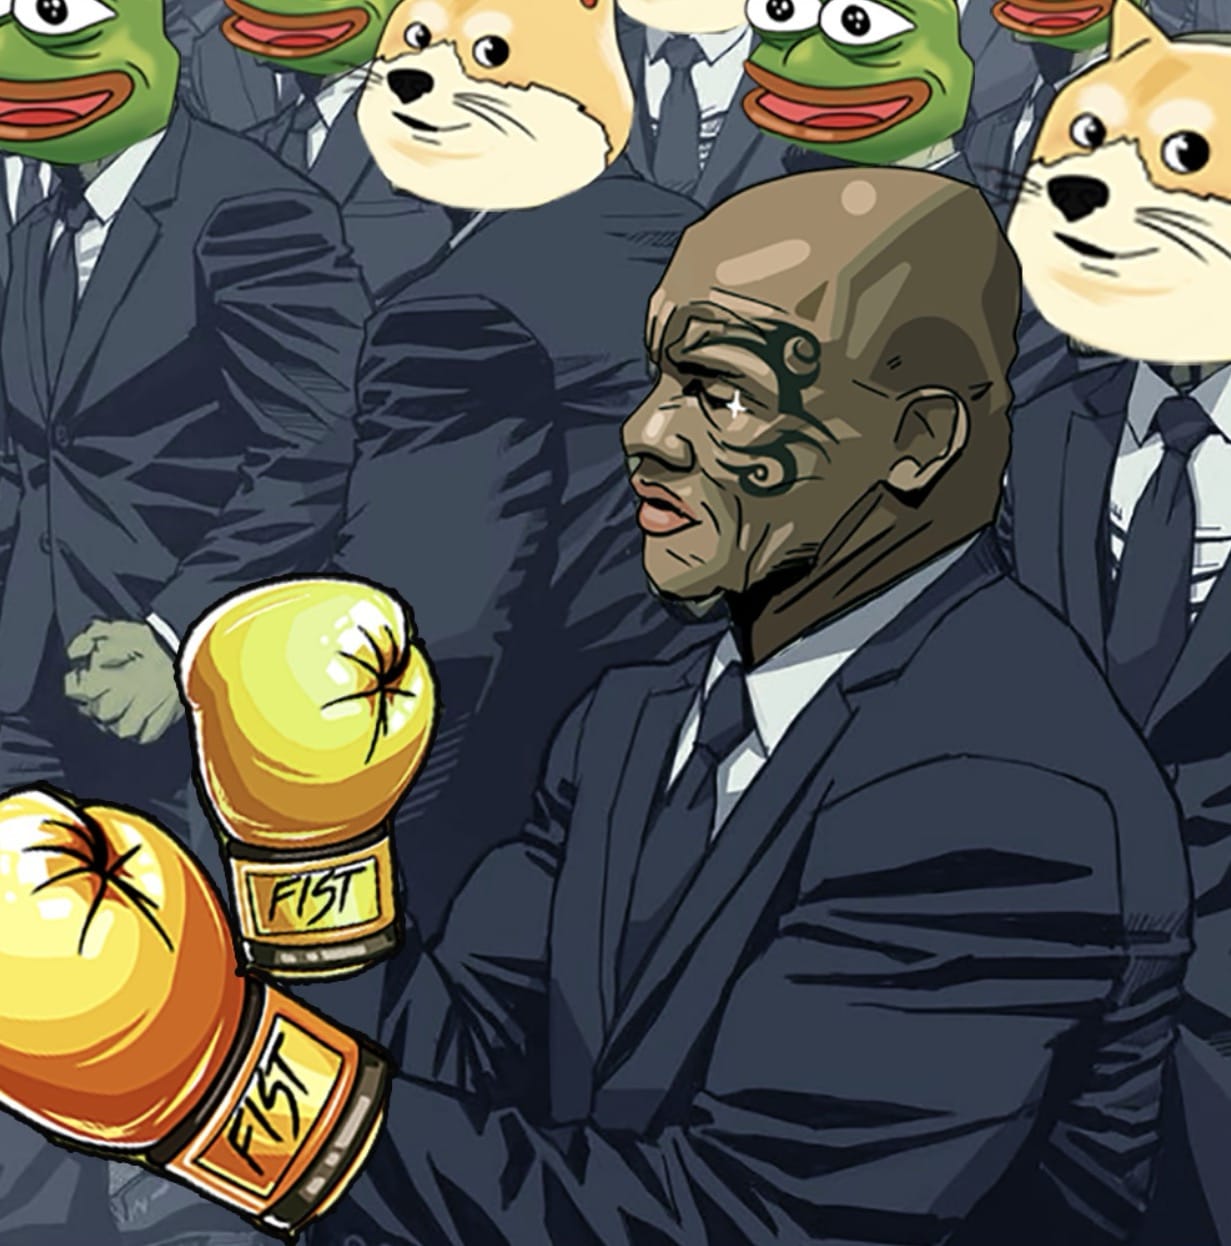 Fight Night: A New Meme Coin Using the Boxing Match between Mike Tyson ...